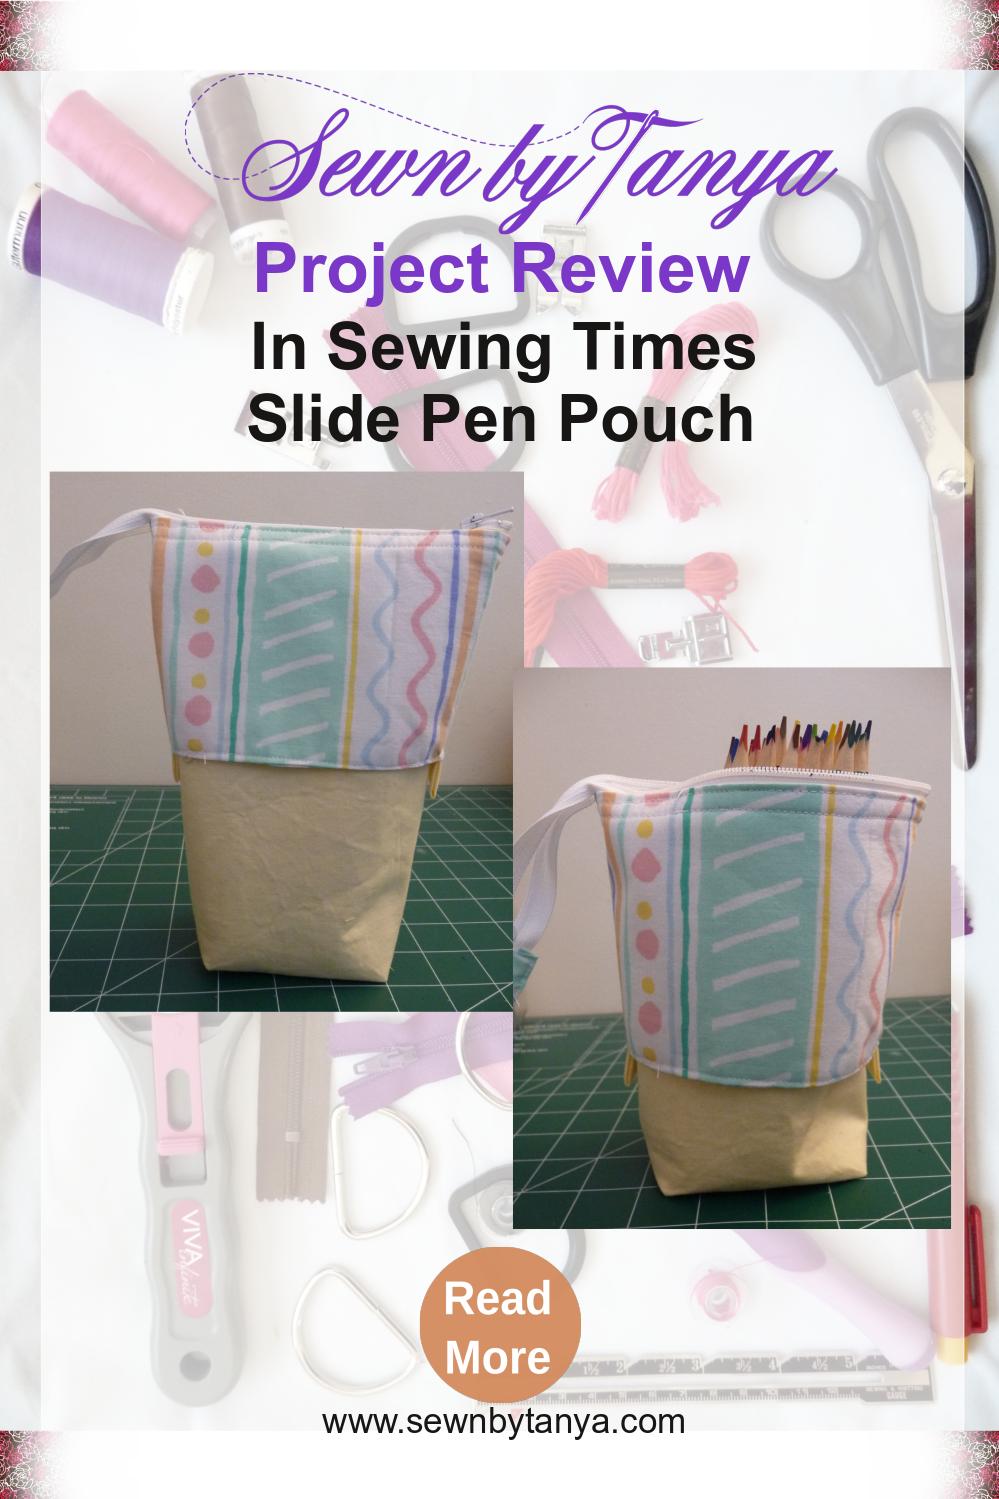 Sewn By Tanya Project Review | In Sewing Times Slide Pen Pouch